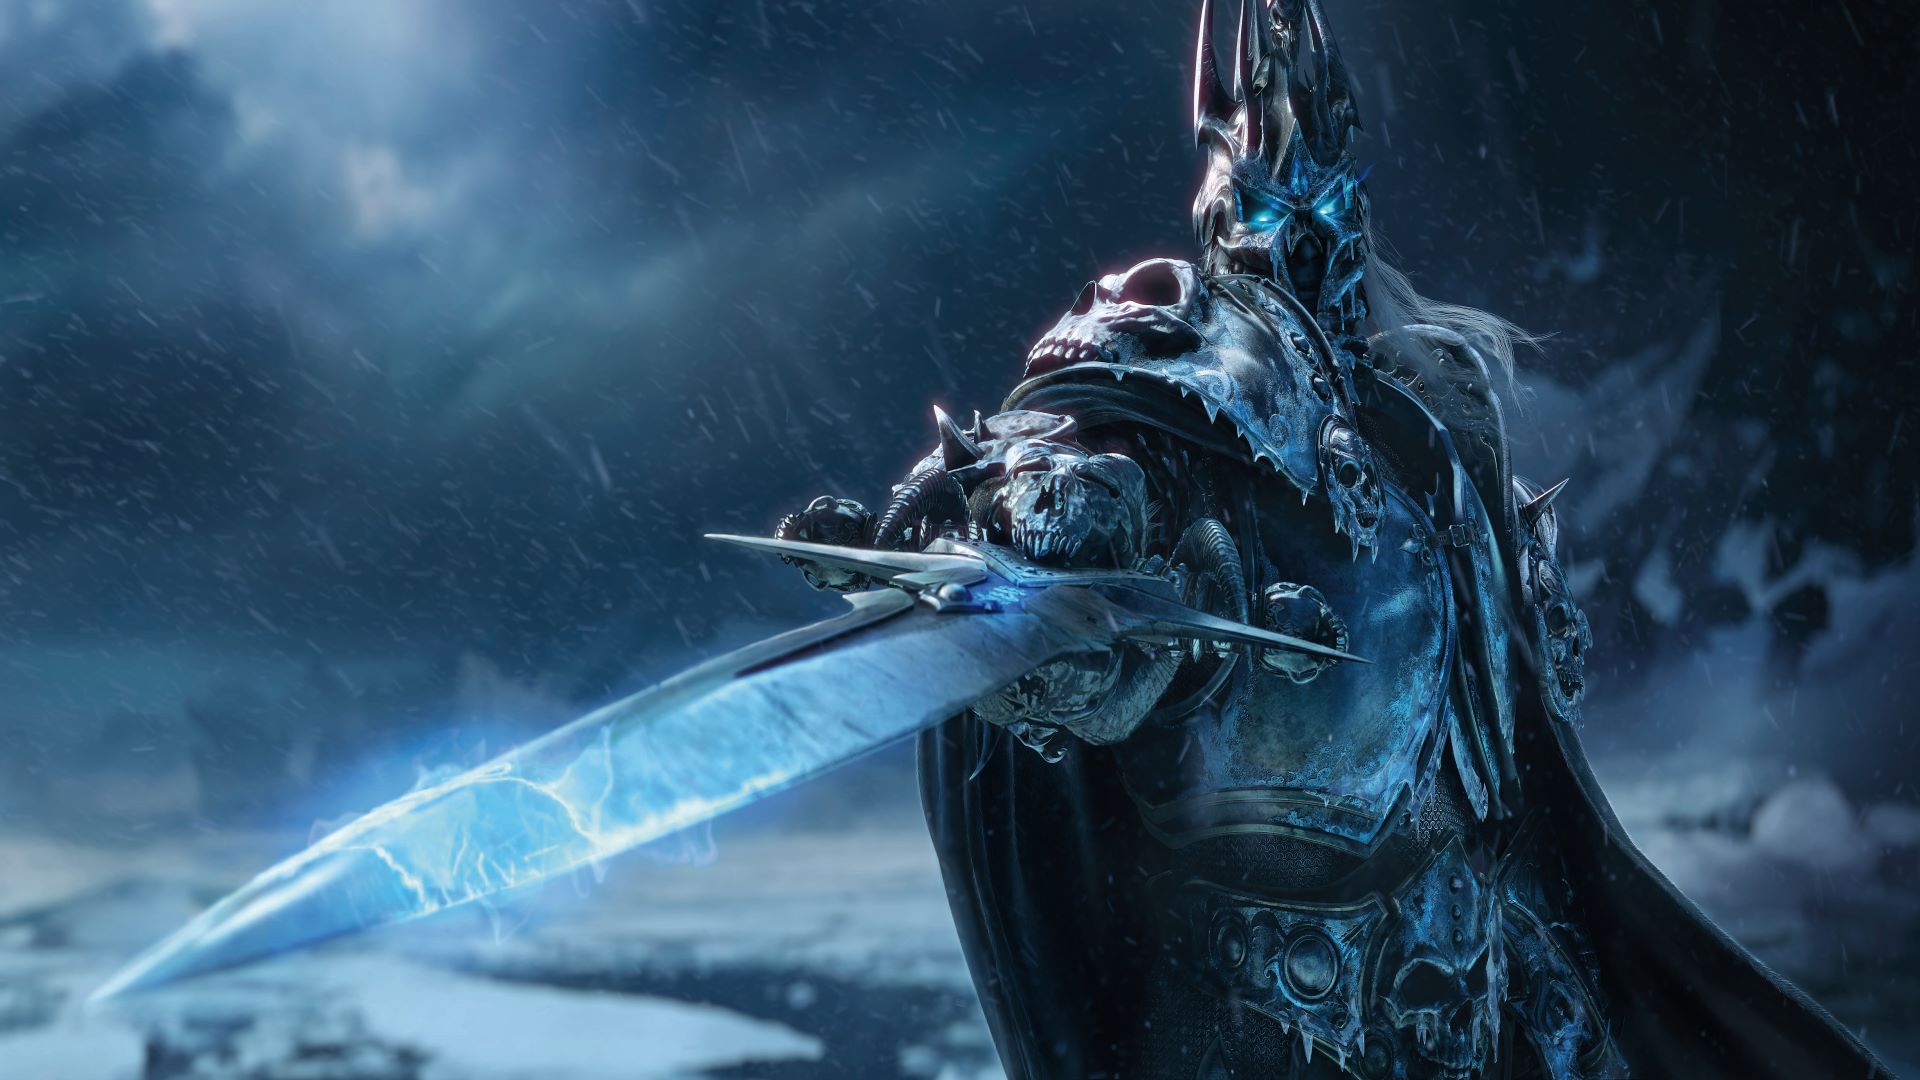 Prepare yourself for World of Warcraft Wrath of the Lich King Classic